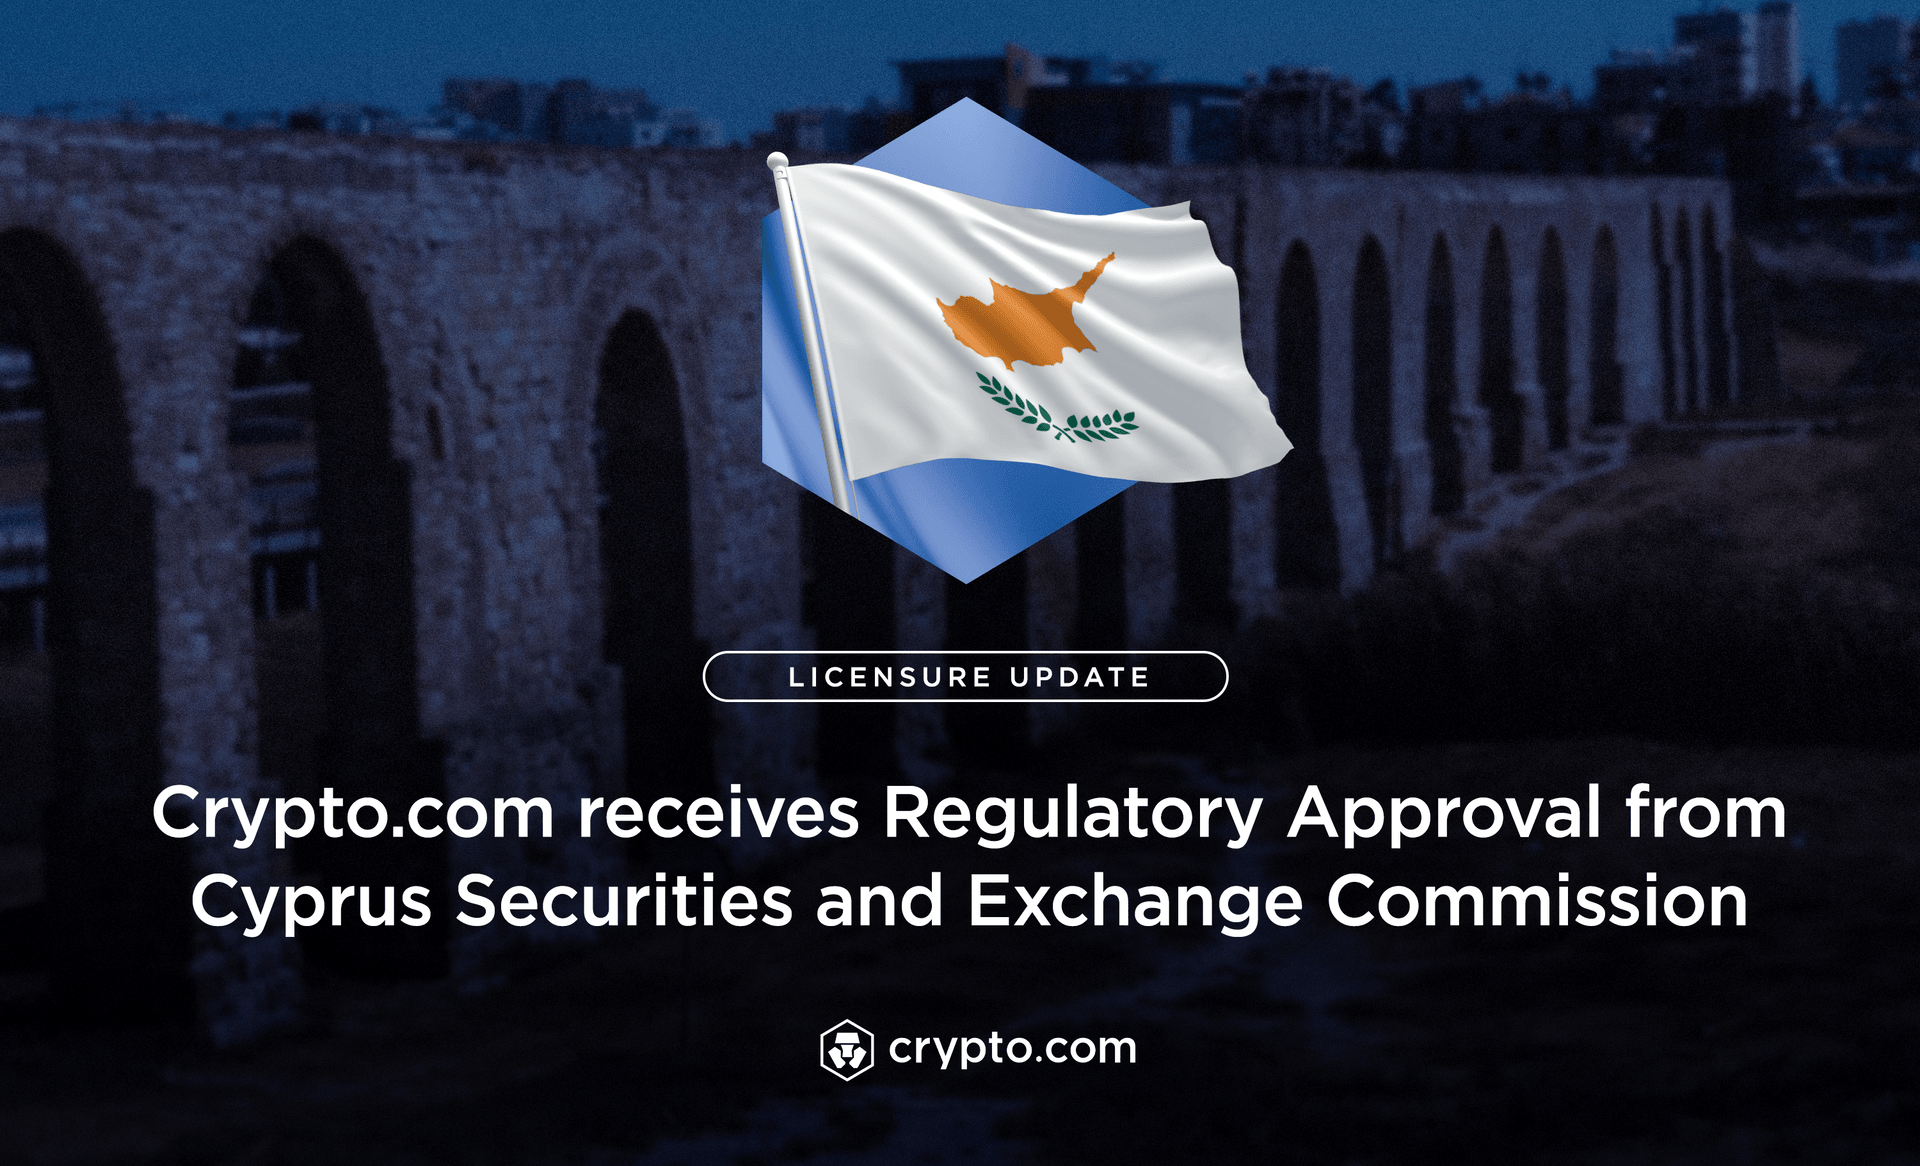 Crypto.com Regulatory Approval in Cyprus